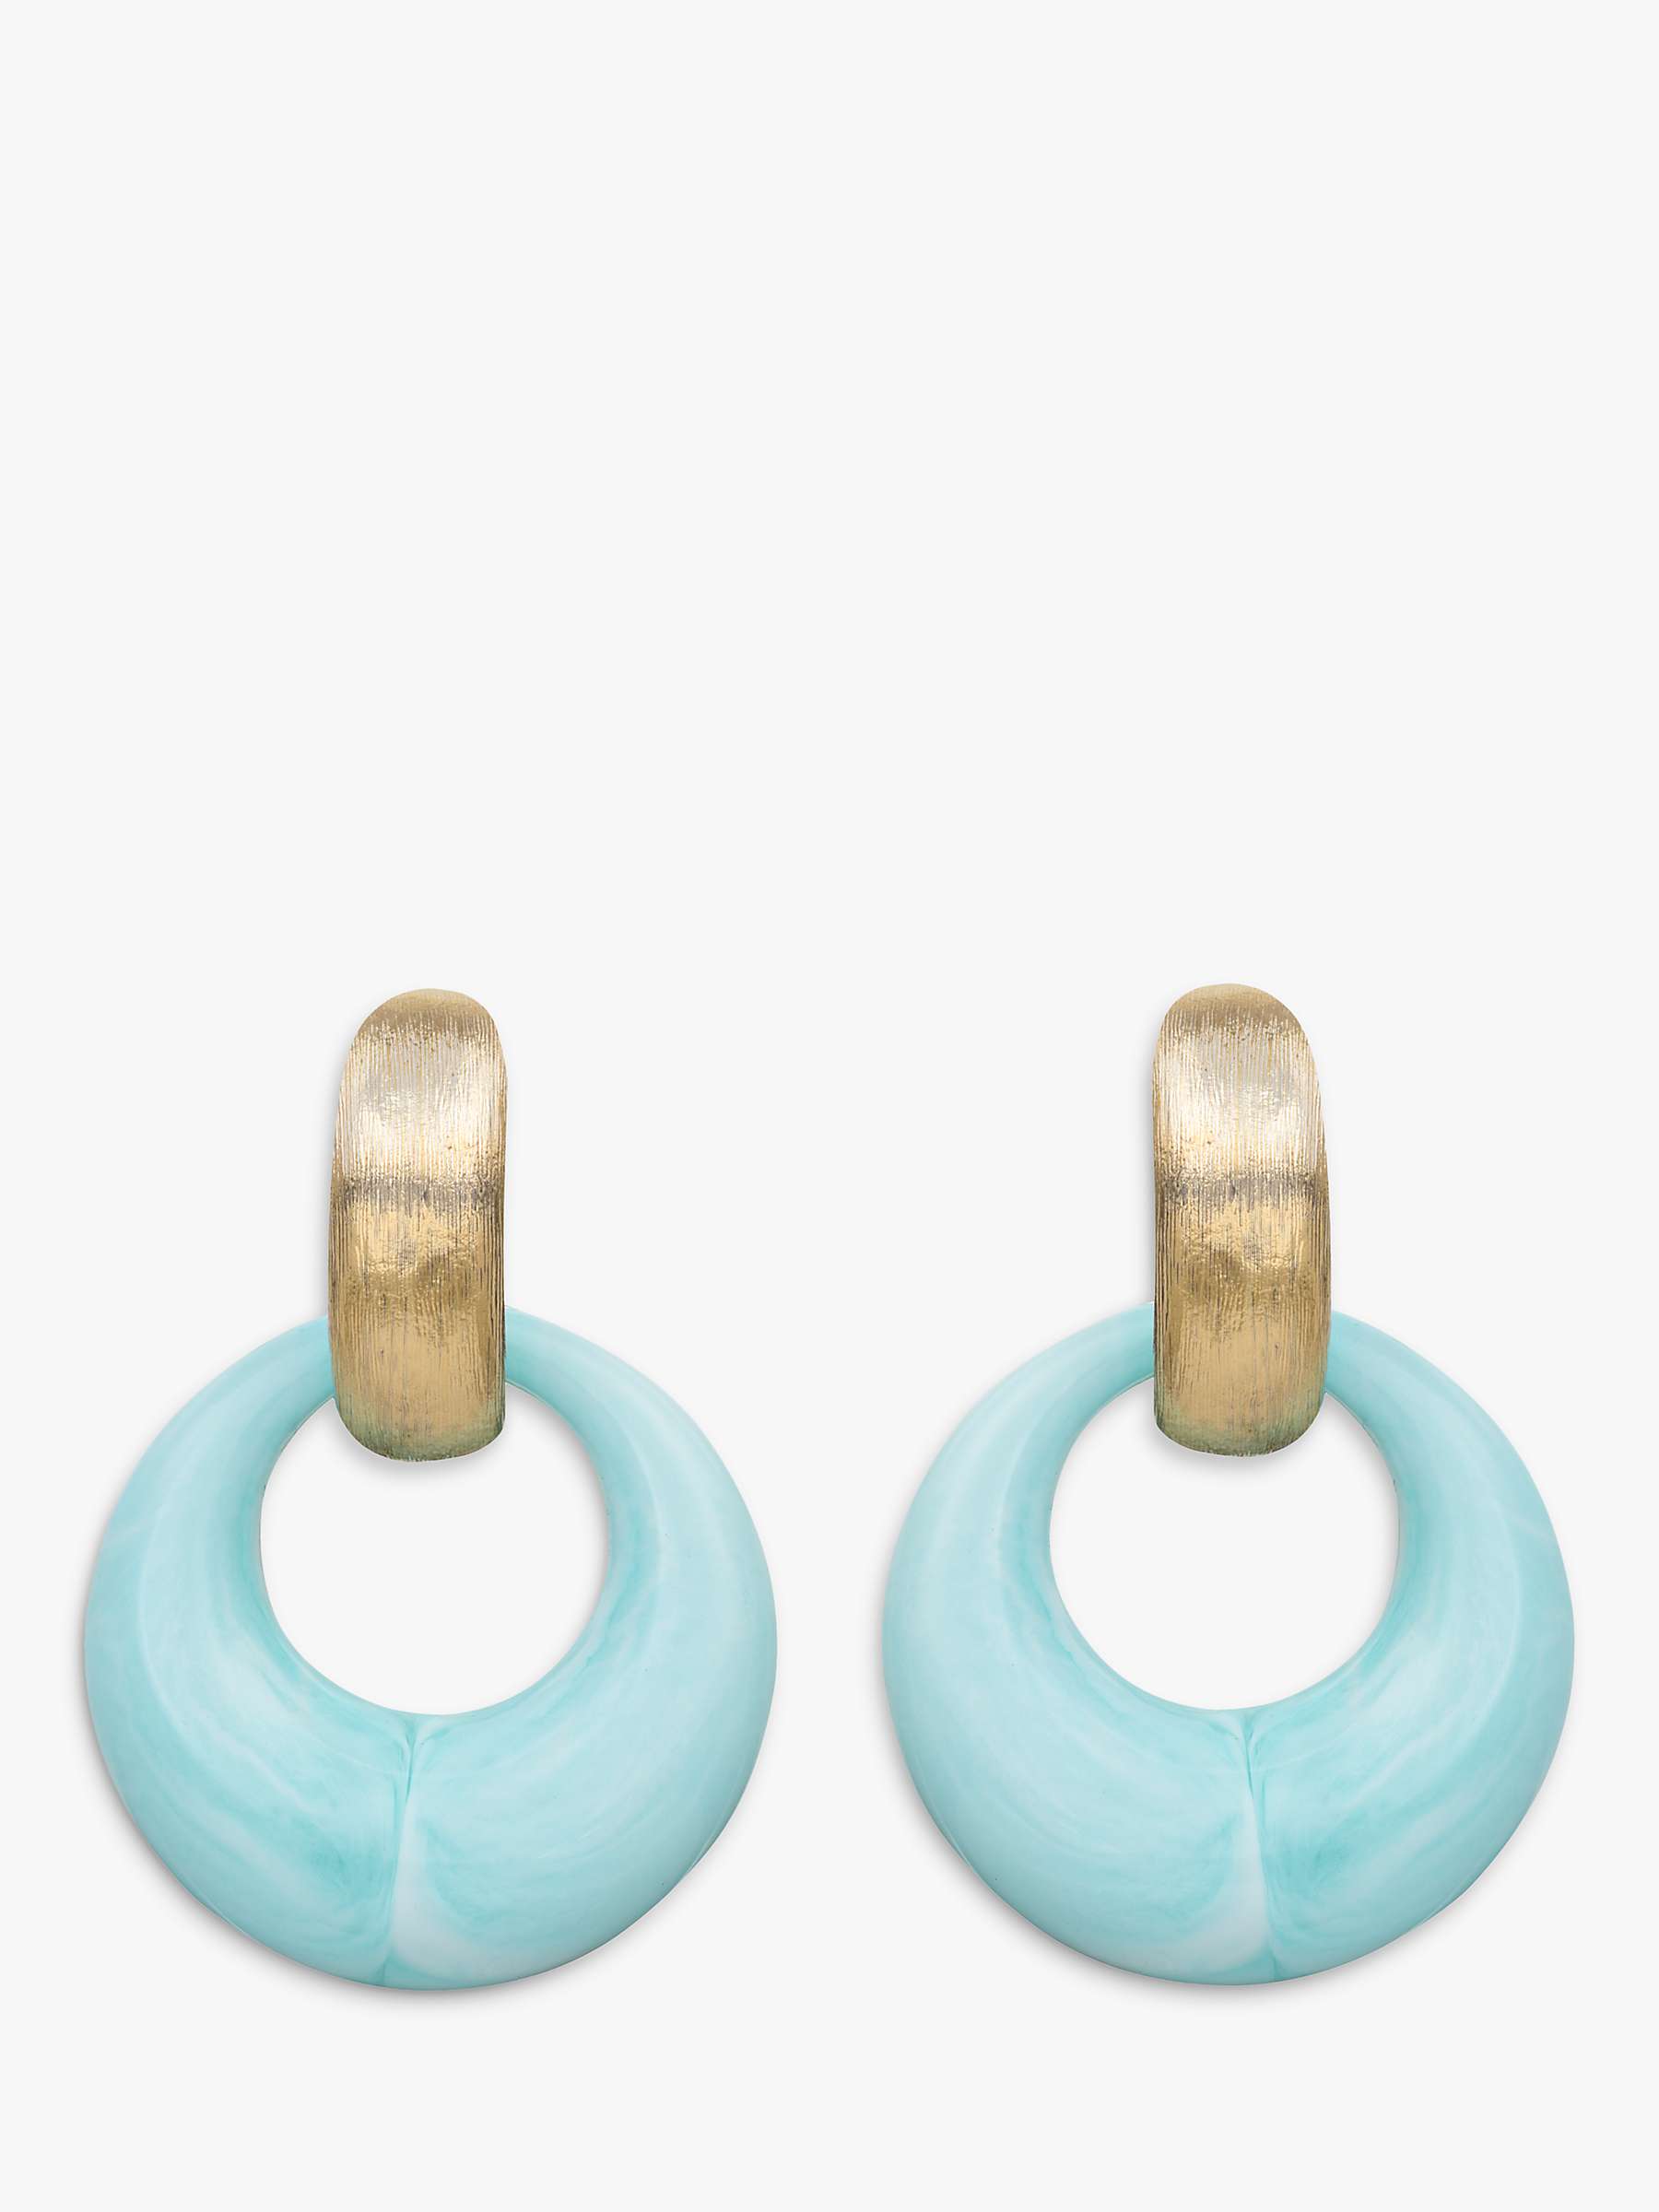 Buy Eclectica Vintage Interchangeable Resin Clip-On Earrings, 3 Pairs Online at johnlewis.com